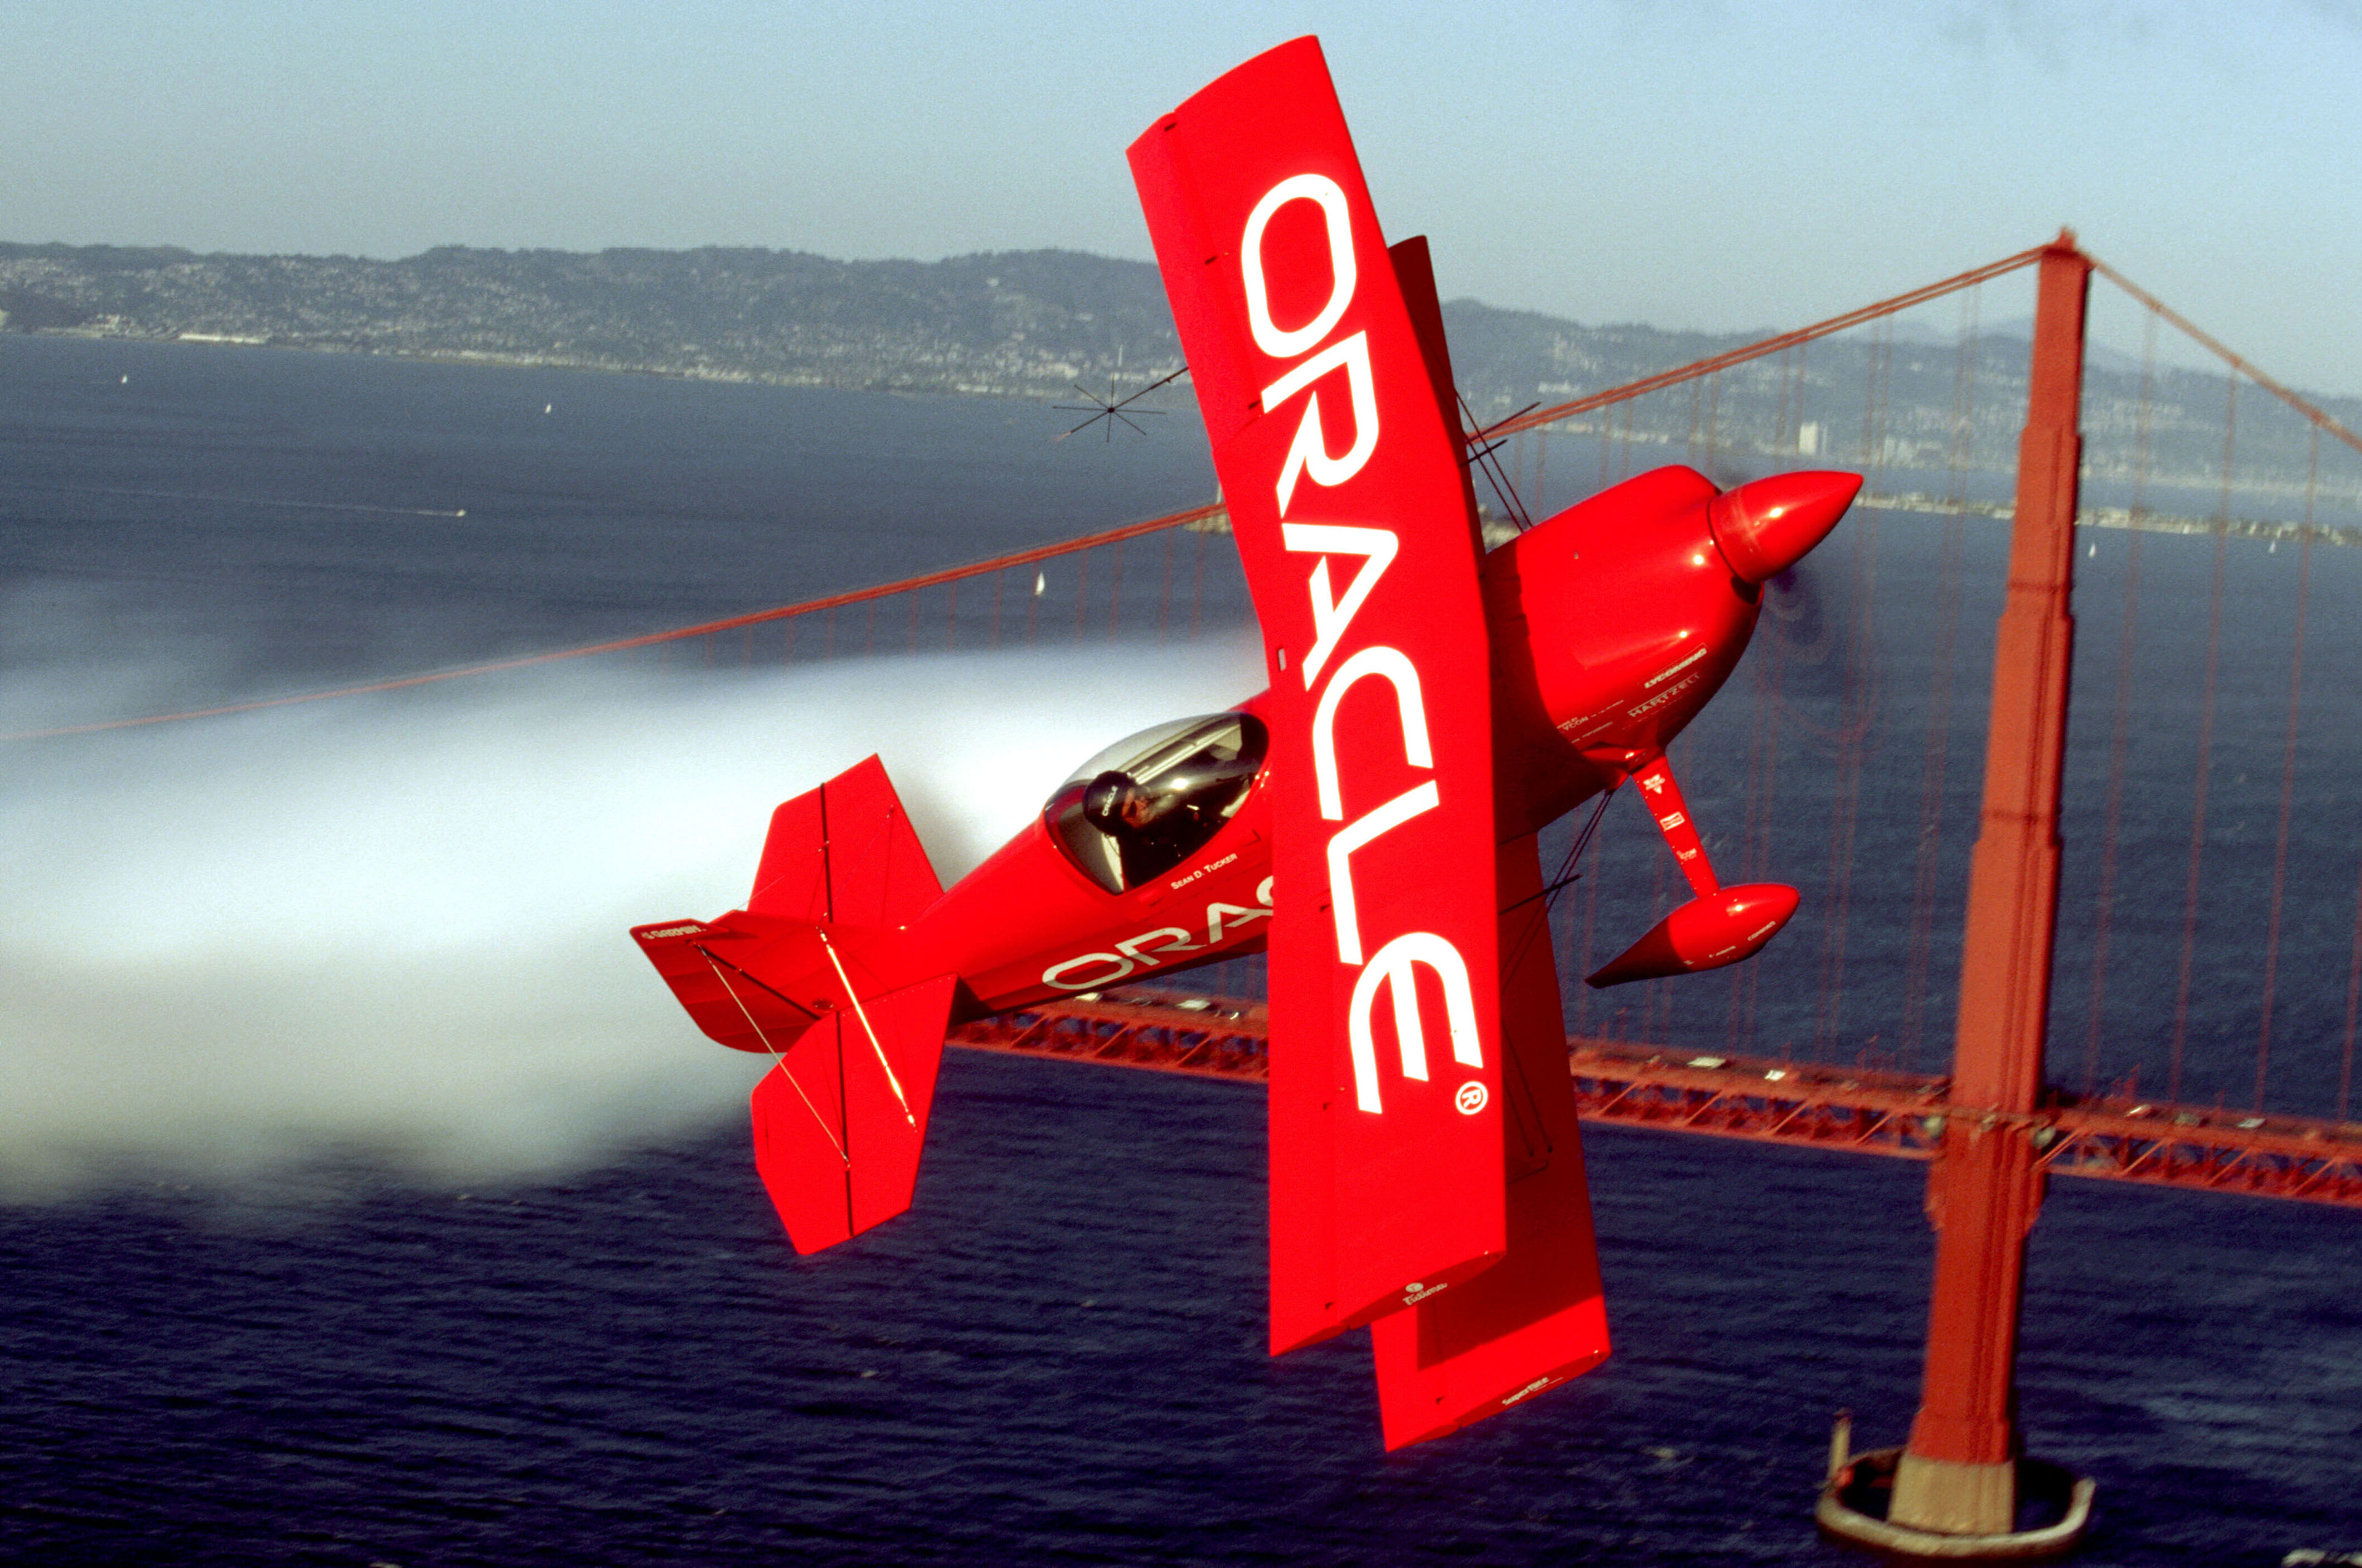 Oracle expects ten times growth in India by 2020.